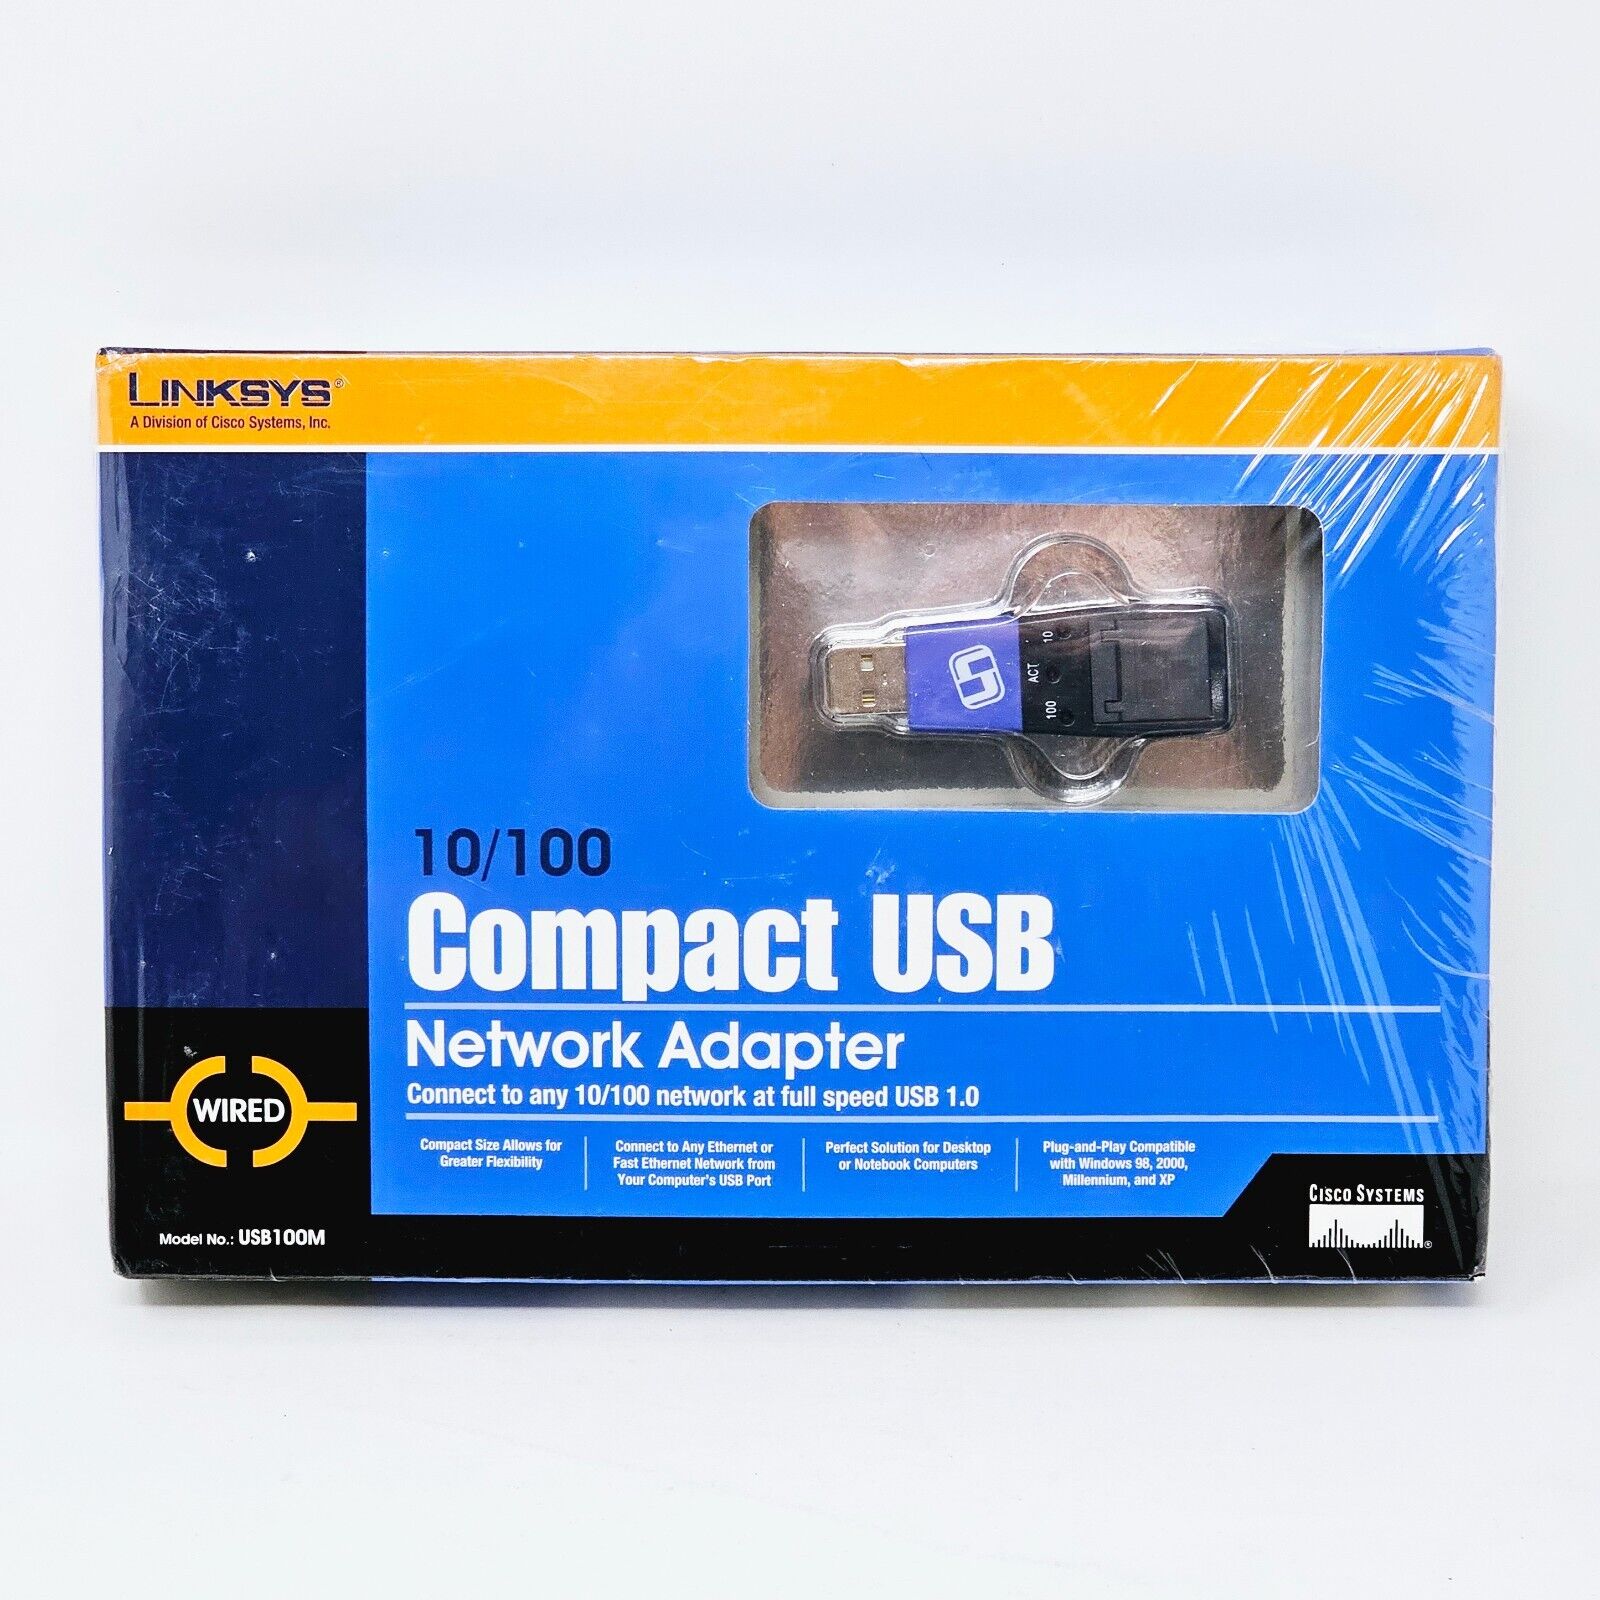 Linksys 10/100 Compact USB Network Adapter Brand Model USB 100m New Sealed